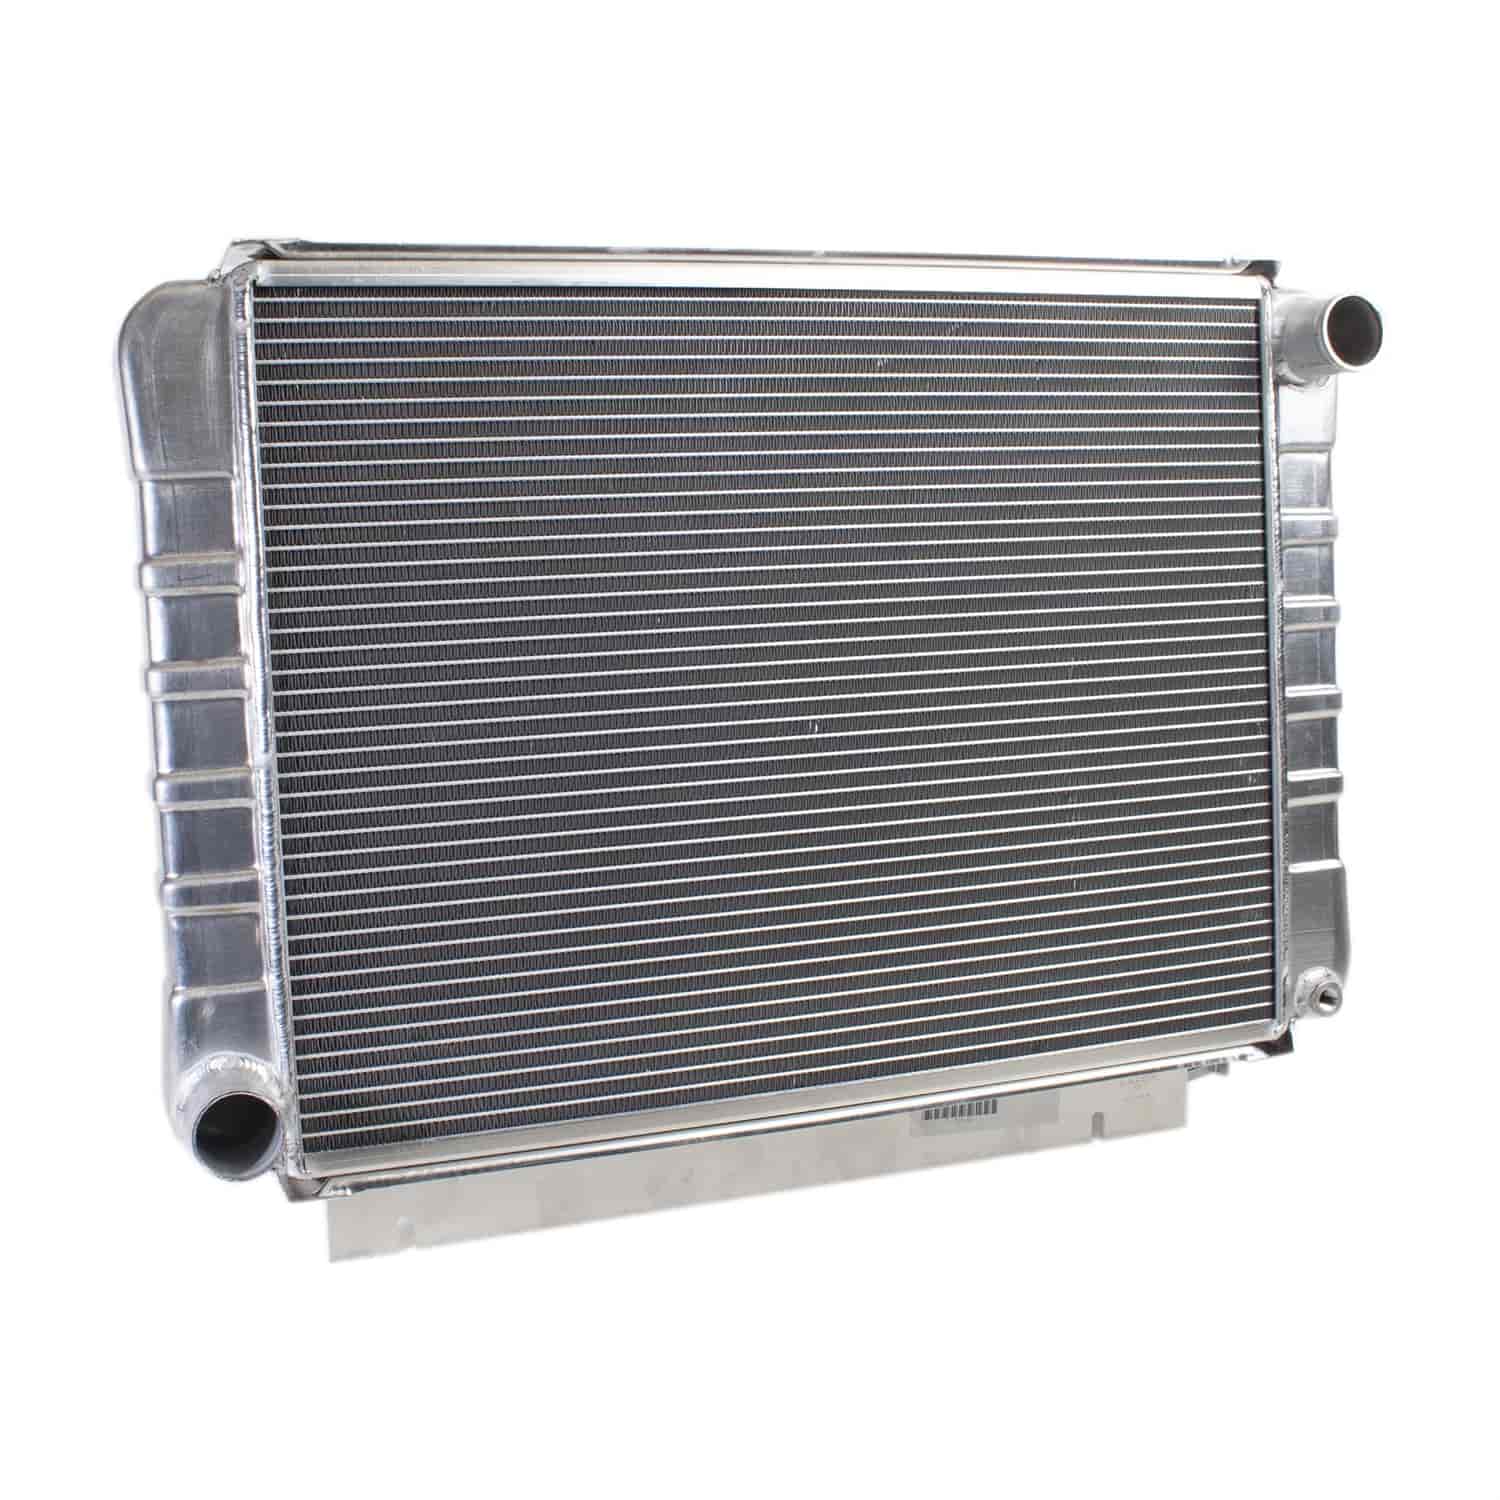 ExactFit Radiator for 1960-1963 Galaxie with Late Ford Small Block & Big Block